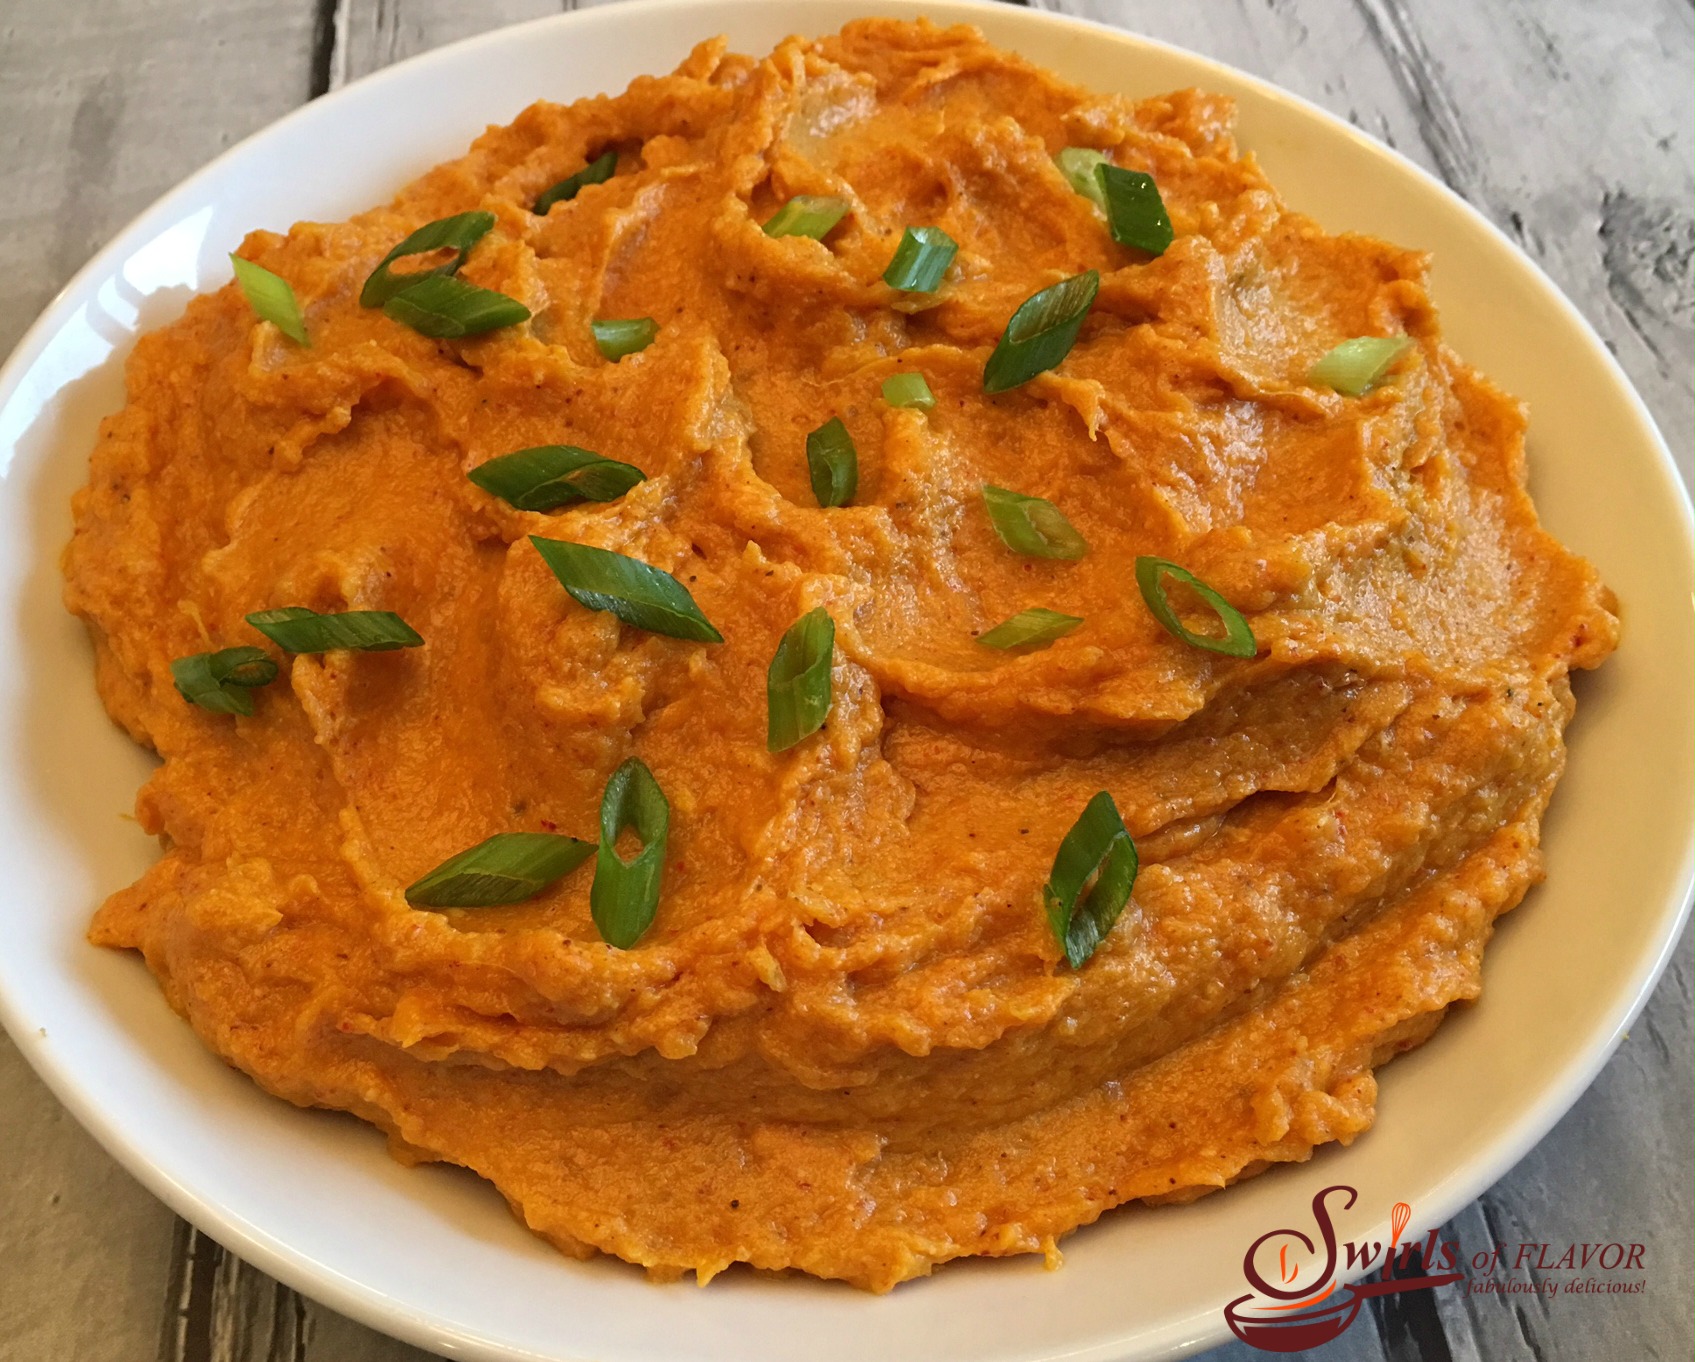 Spiced Sweet Potatoes with sliced scallions